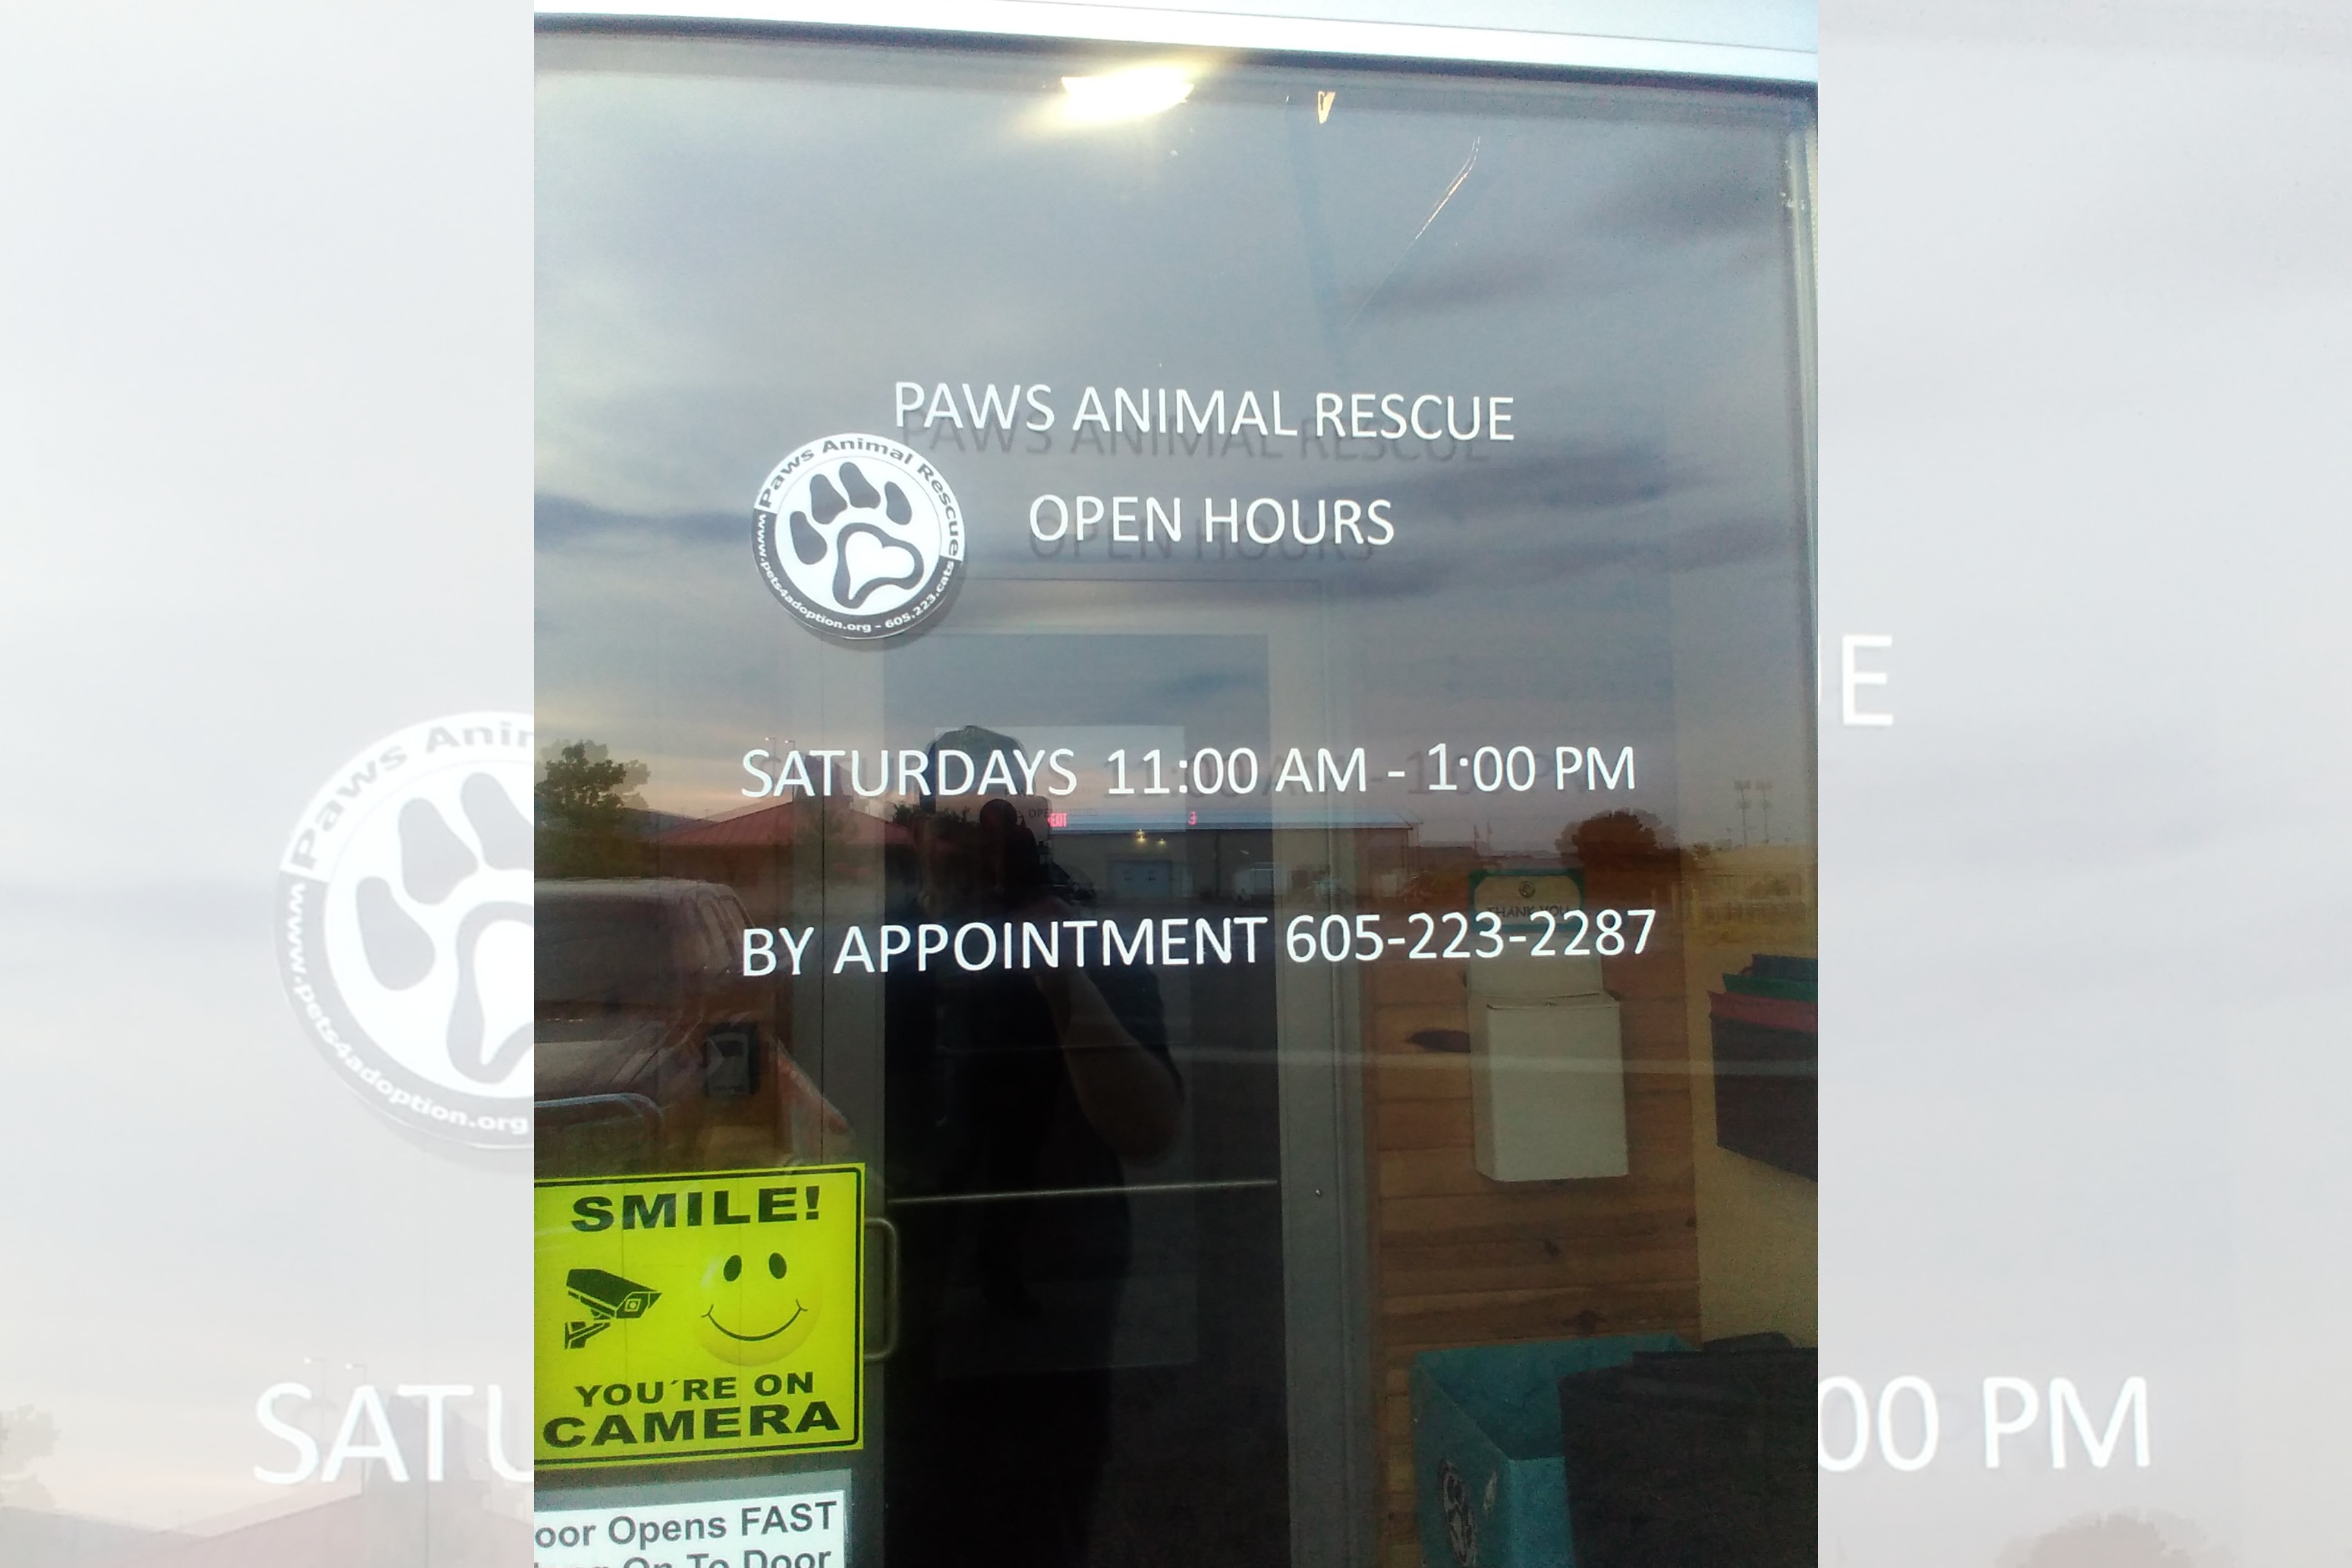 PAWS ANIMAL RESCUE OPEN HOURS